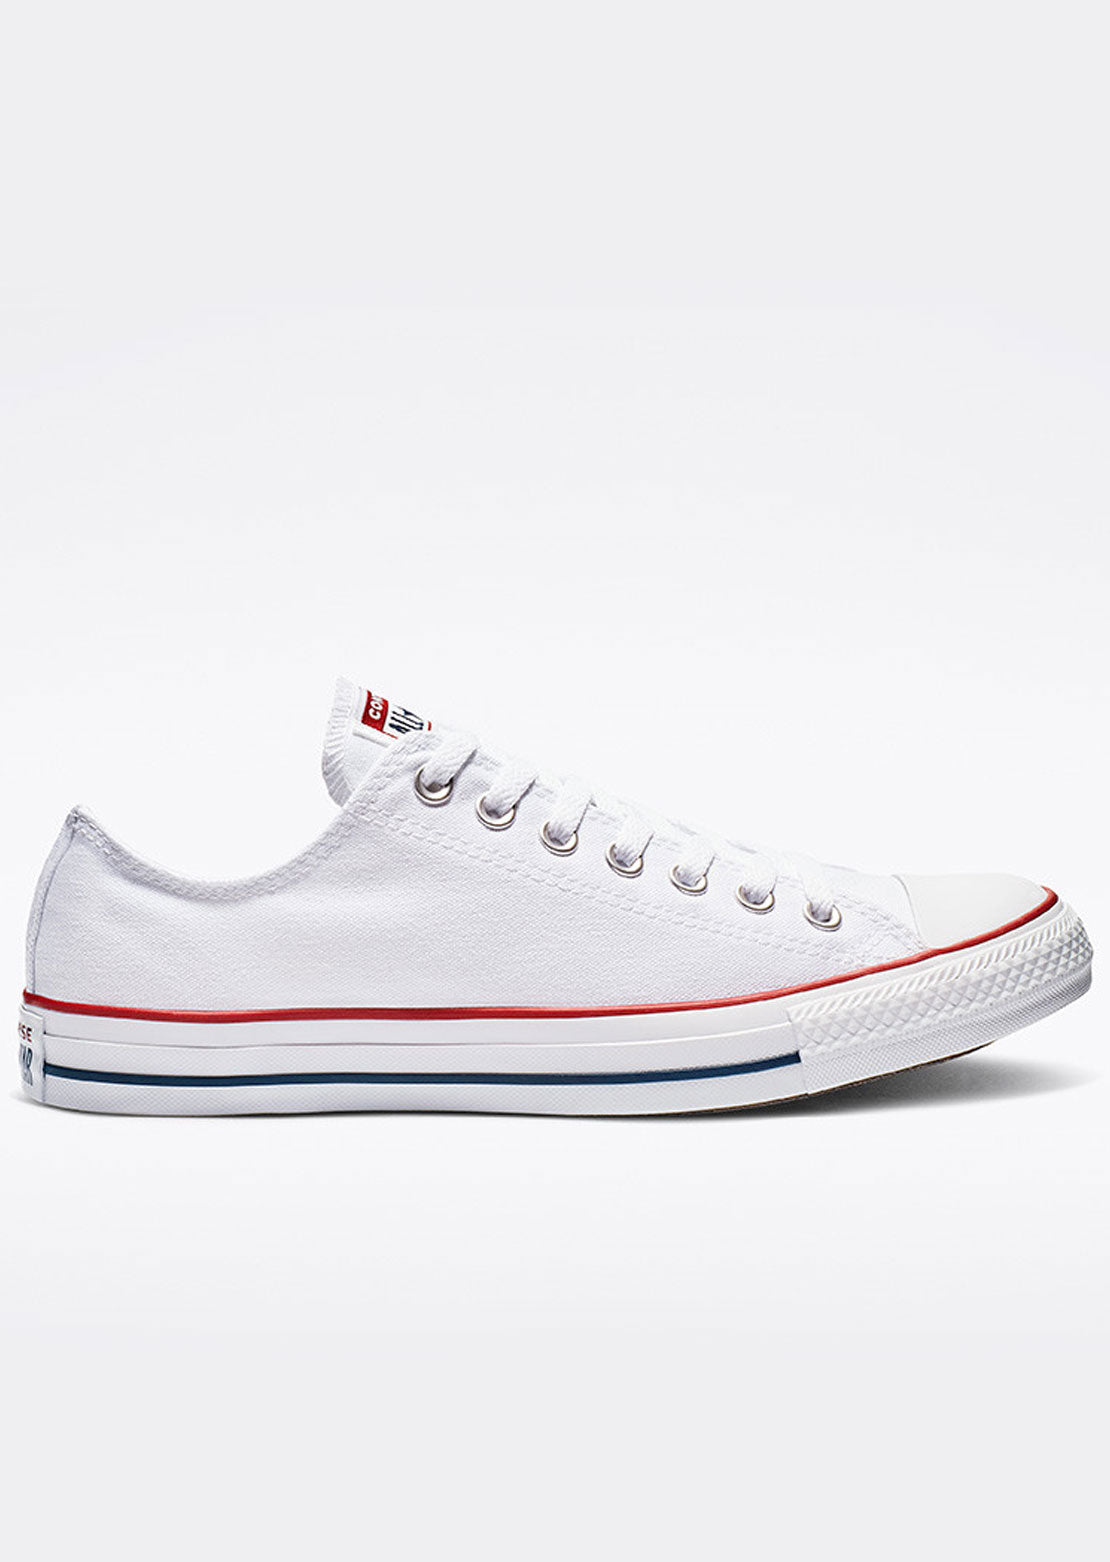 Converse Unisex Chuck Taylor All Star Low Top Shoes Optical White